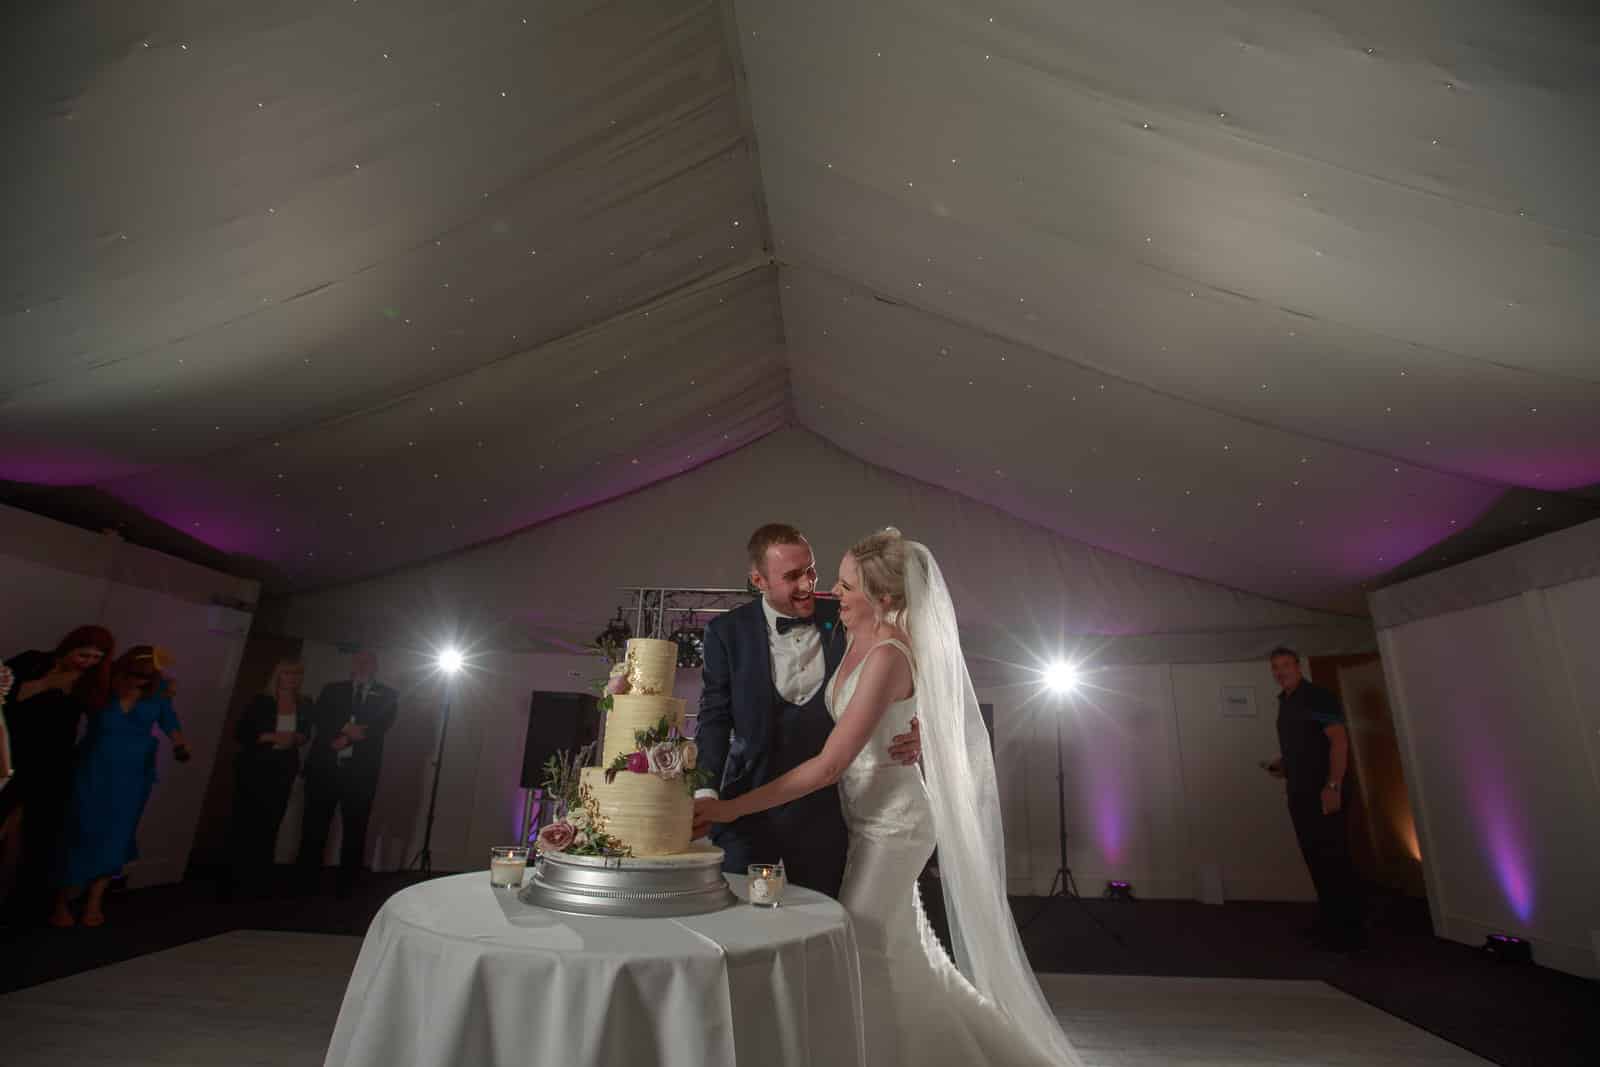 the happy newlyweds cut their wedding cake as the guests look on 